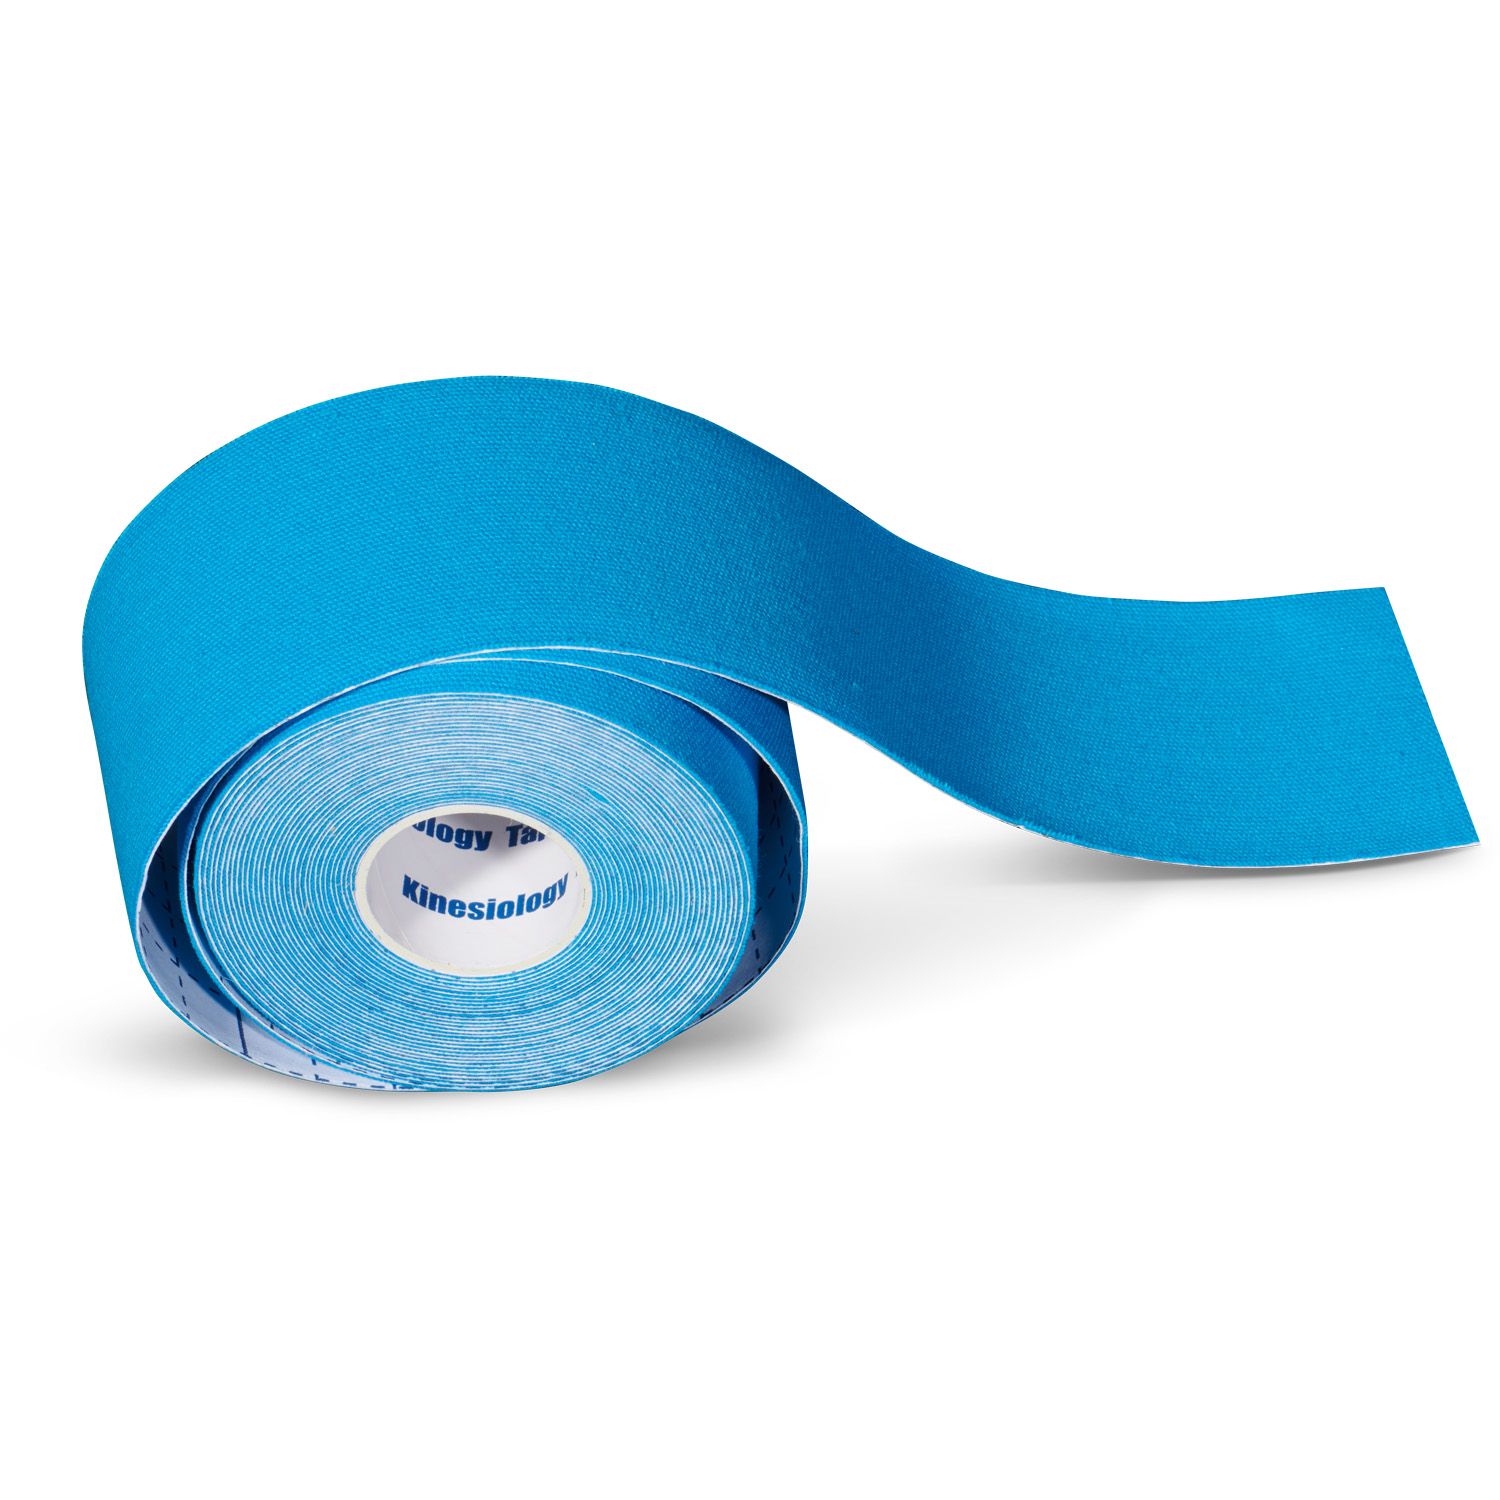 Kinesiology tape 12 rolls plus 3 rolls for free blue